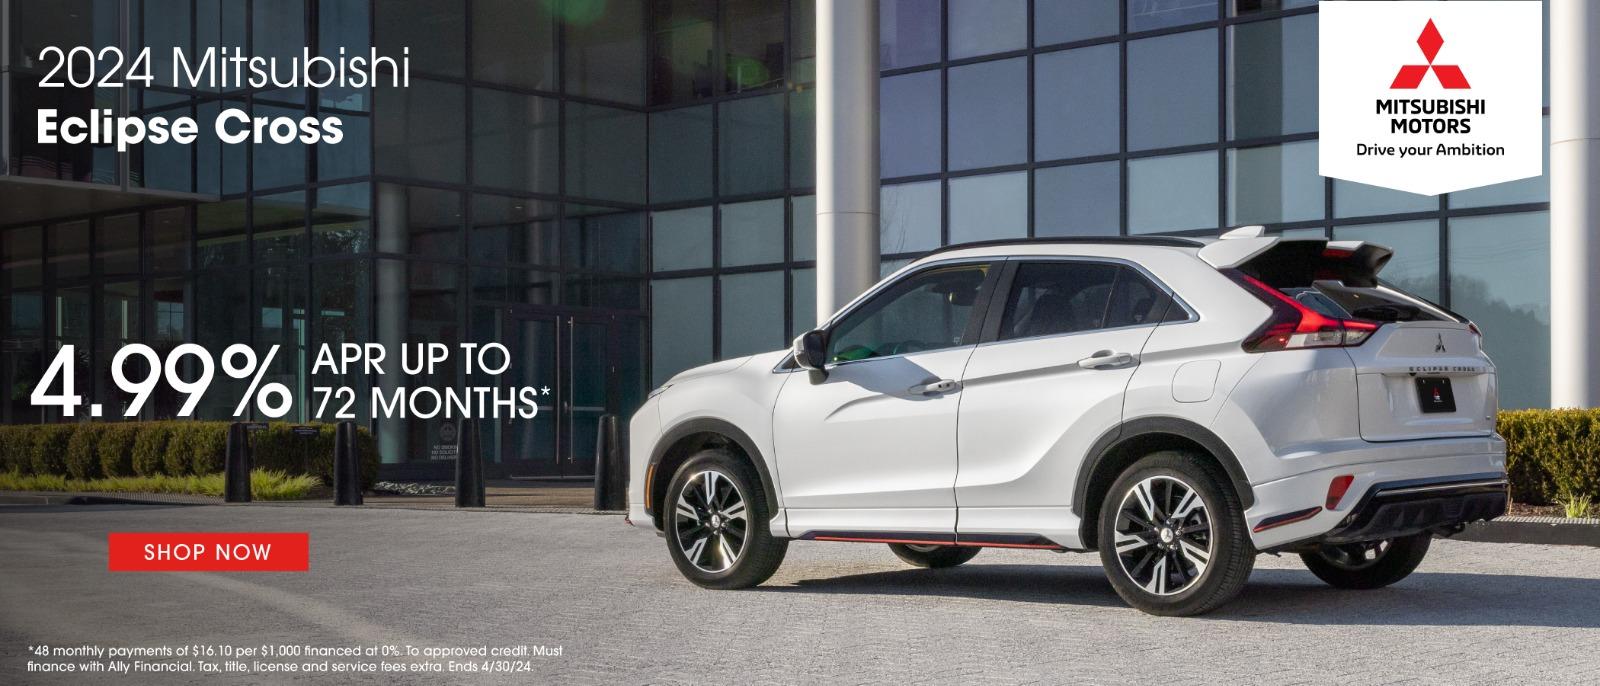 2024 Mitsubishi Eclipse Cross | 4.99% APR for 48 months